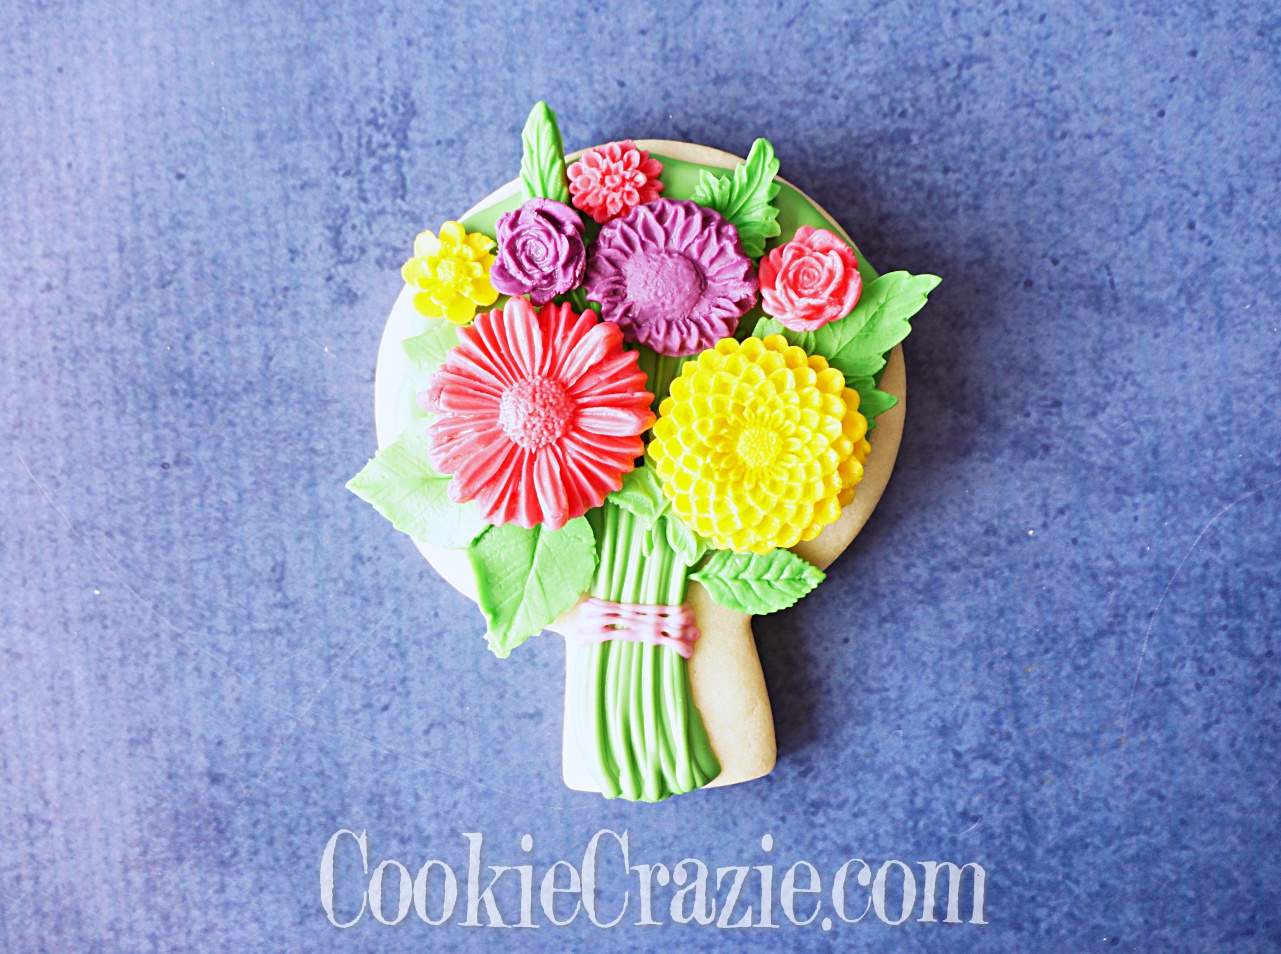  Spring Floral Bouquet Decorated Sugar Cookie YouTube video  HERE  